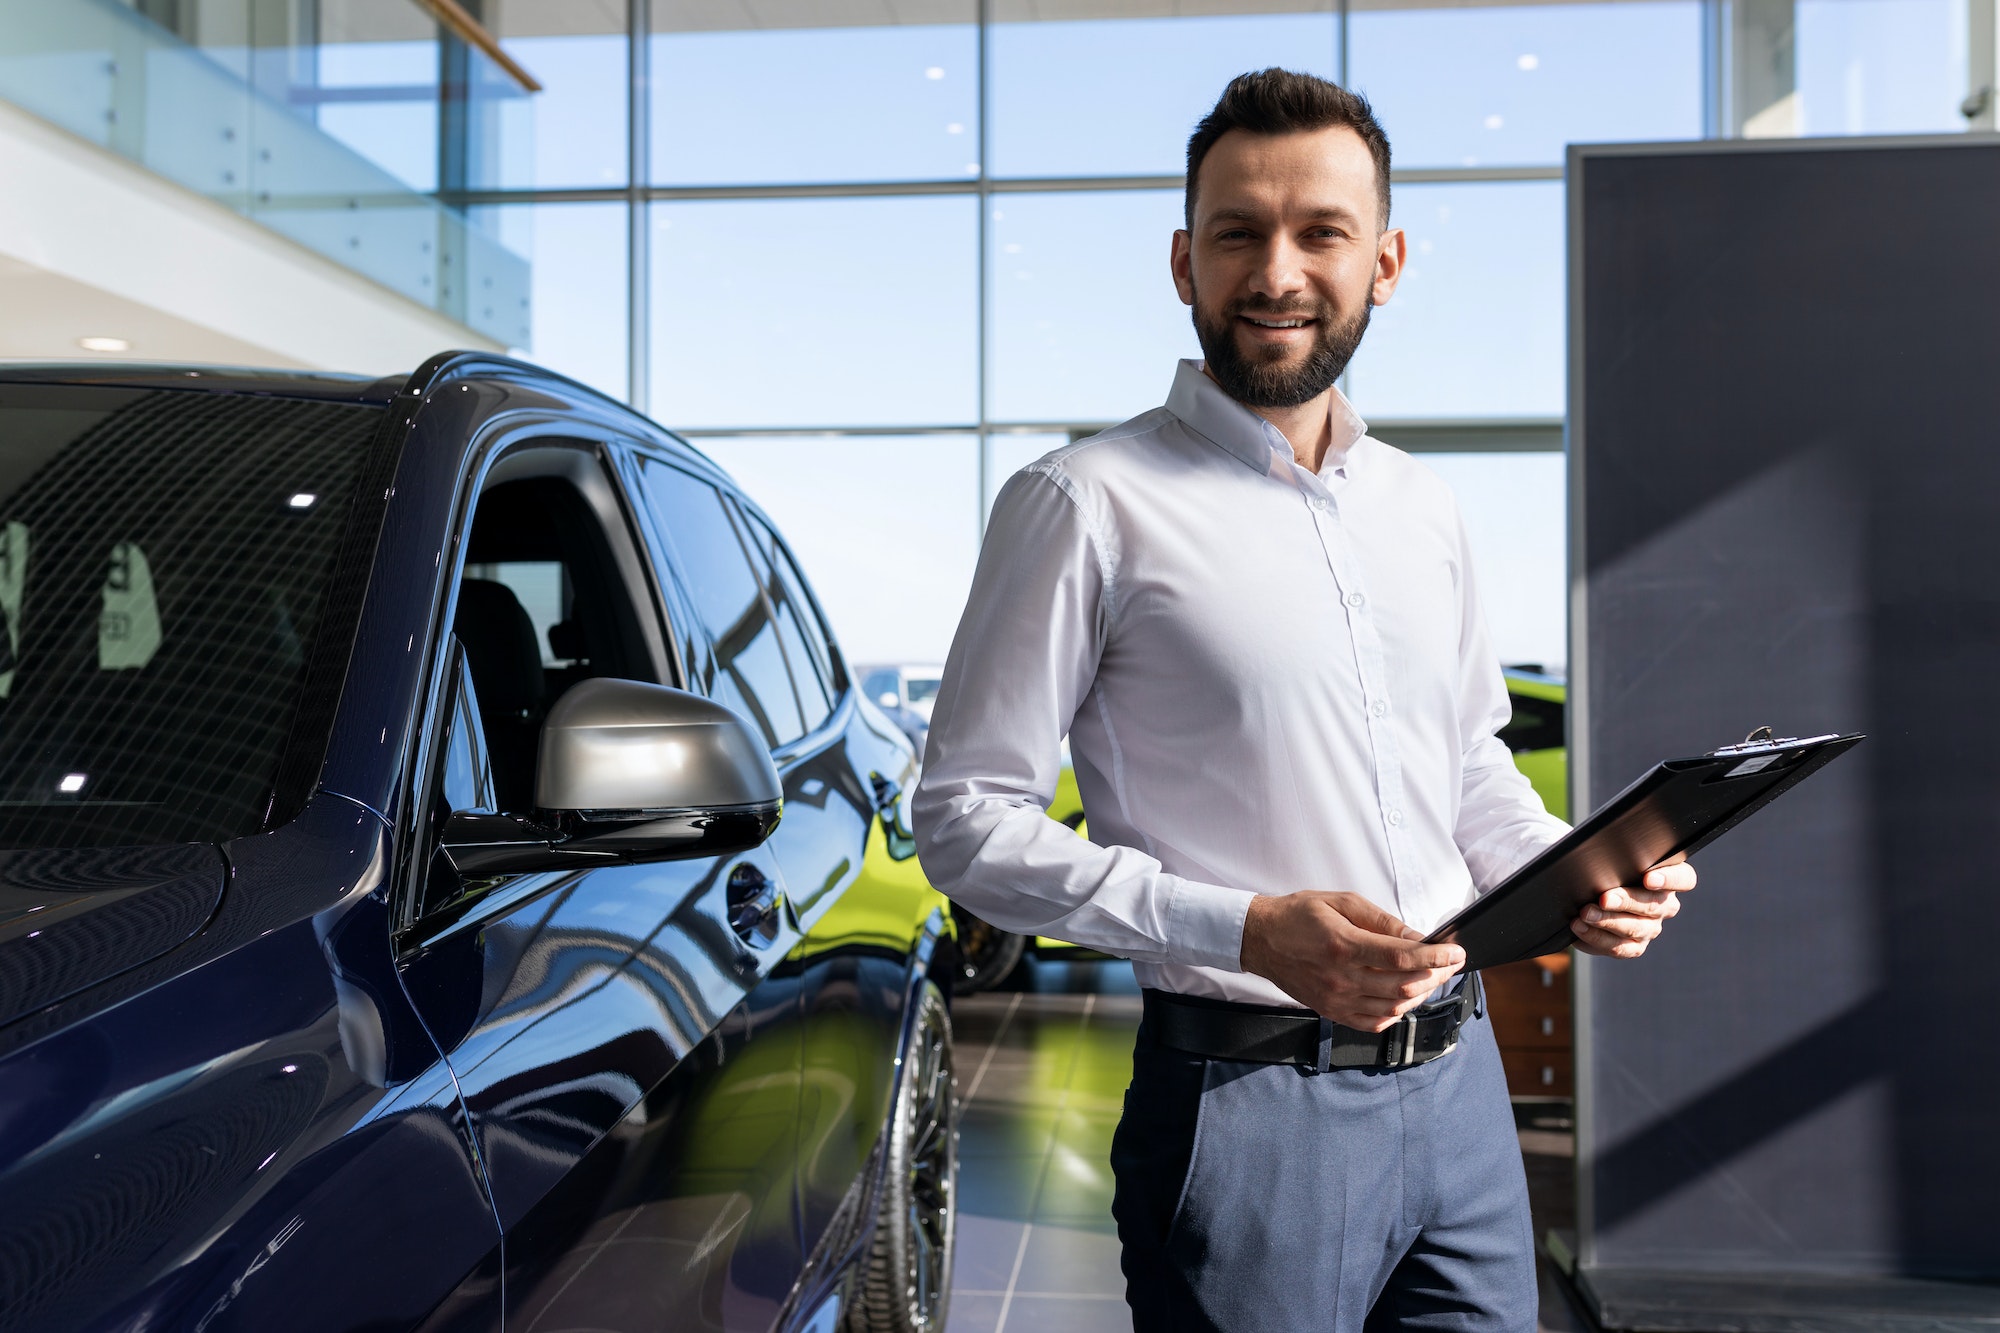 insurance company employee next to a new car in a car dealership center